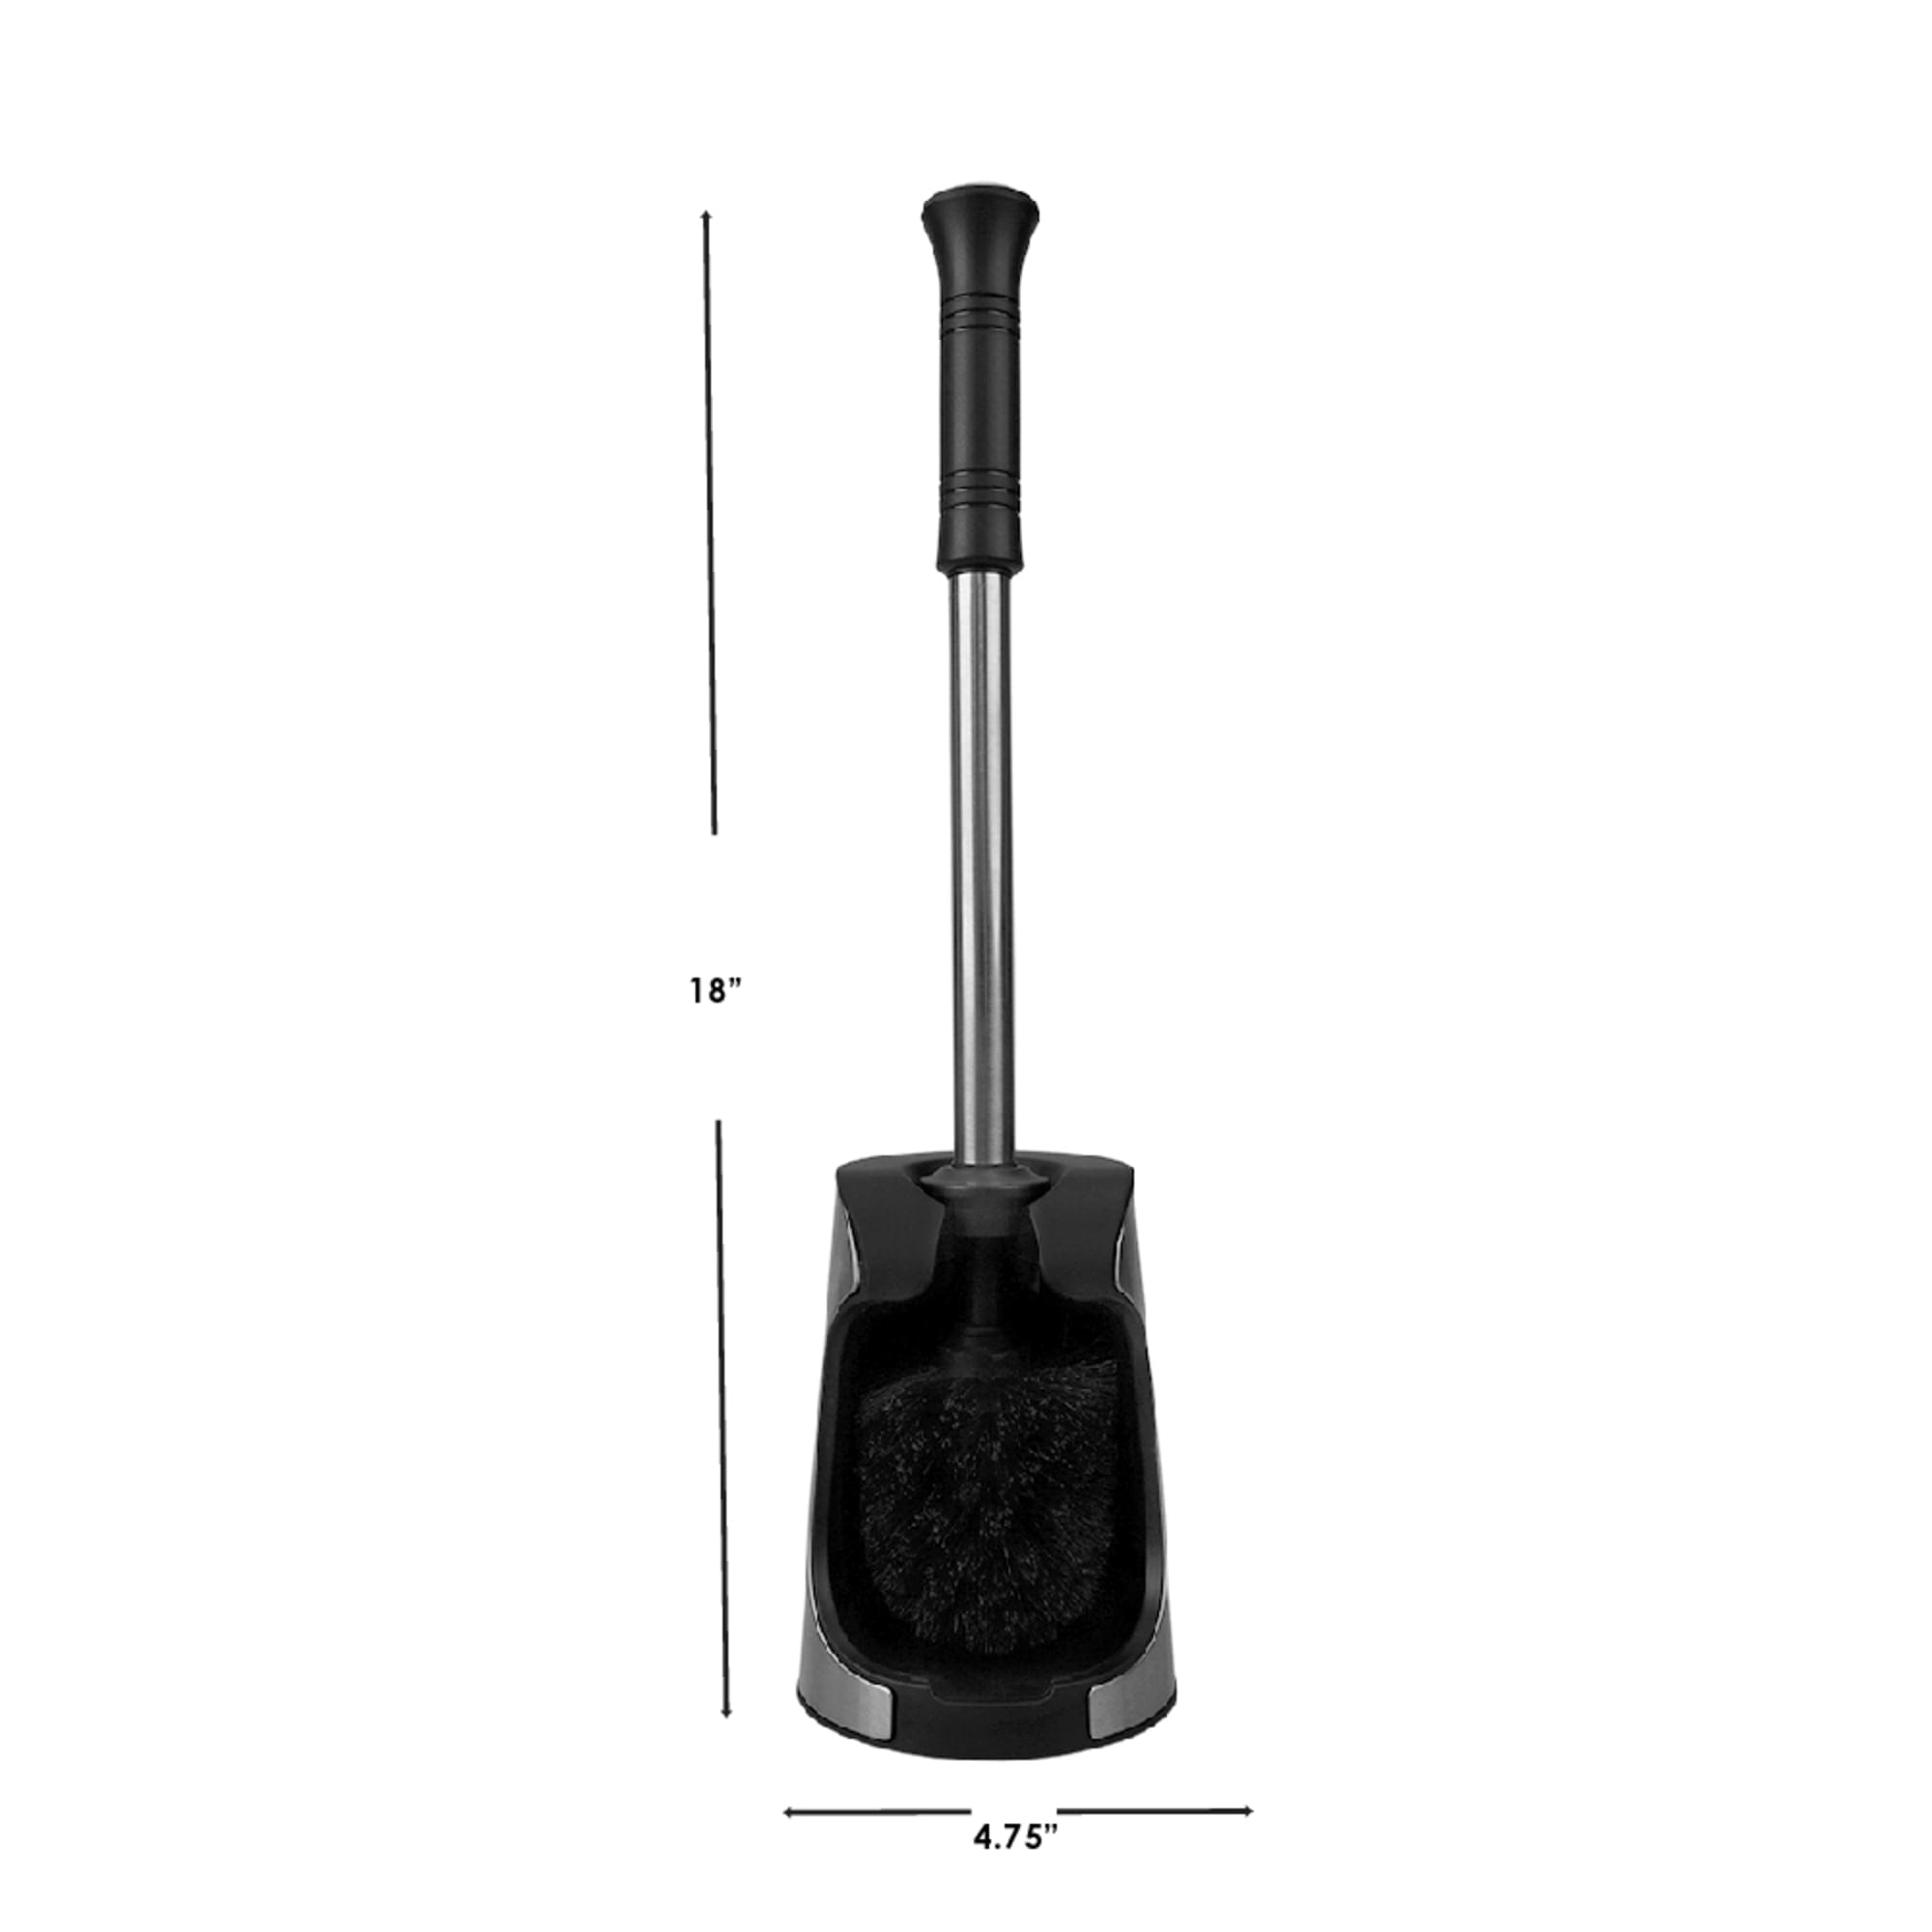 Home Basics Brushed Stainless Toilet Brush with Holder and Comfort Grip Handle with Easy to Store Compact Non-Skid Caddy, Black $10.00 EACH, CASE PACK OF 12